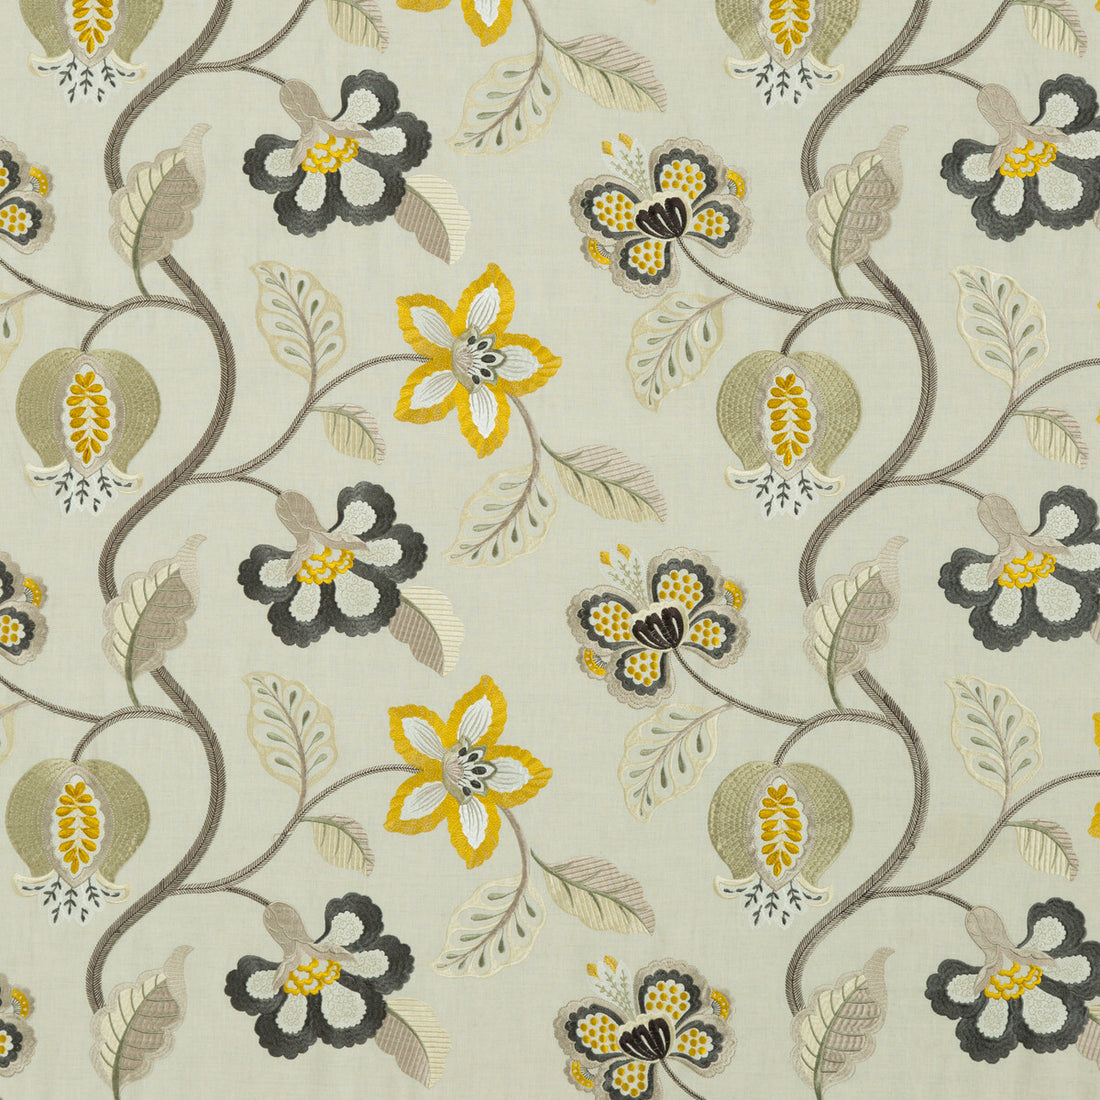 Elvaston fabric in graphite/citron color - pattern BF10532.4.0 - by G P &amp; J Baker in the Langdale collection